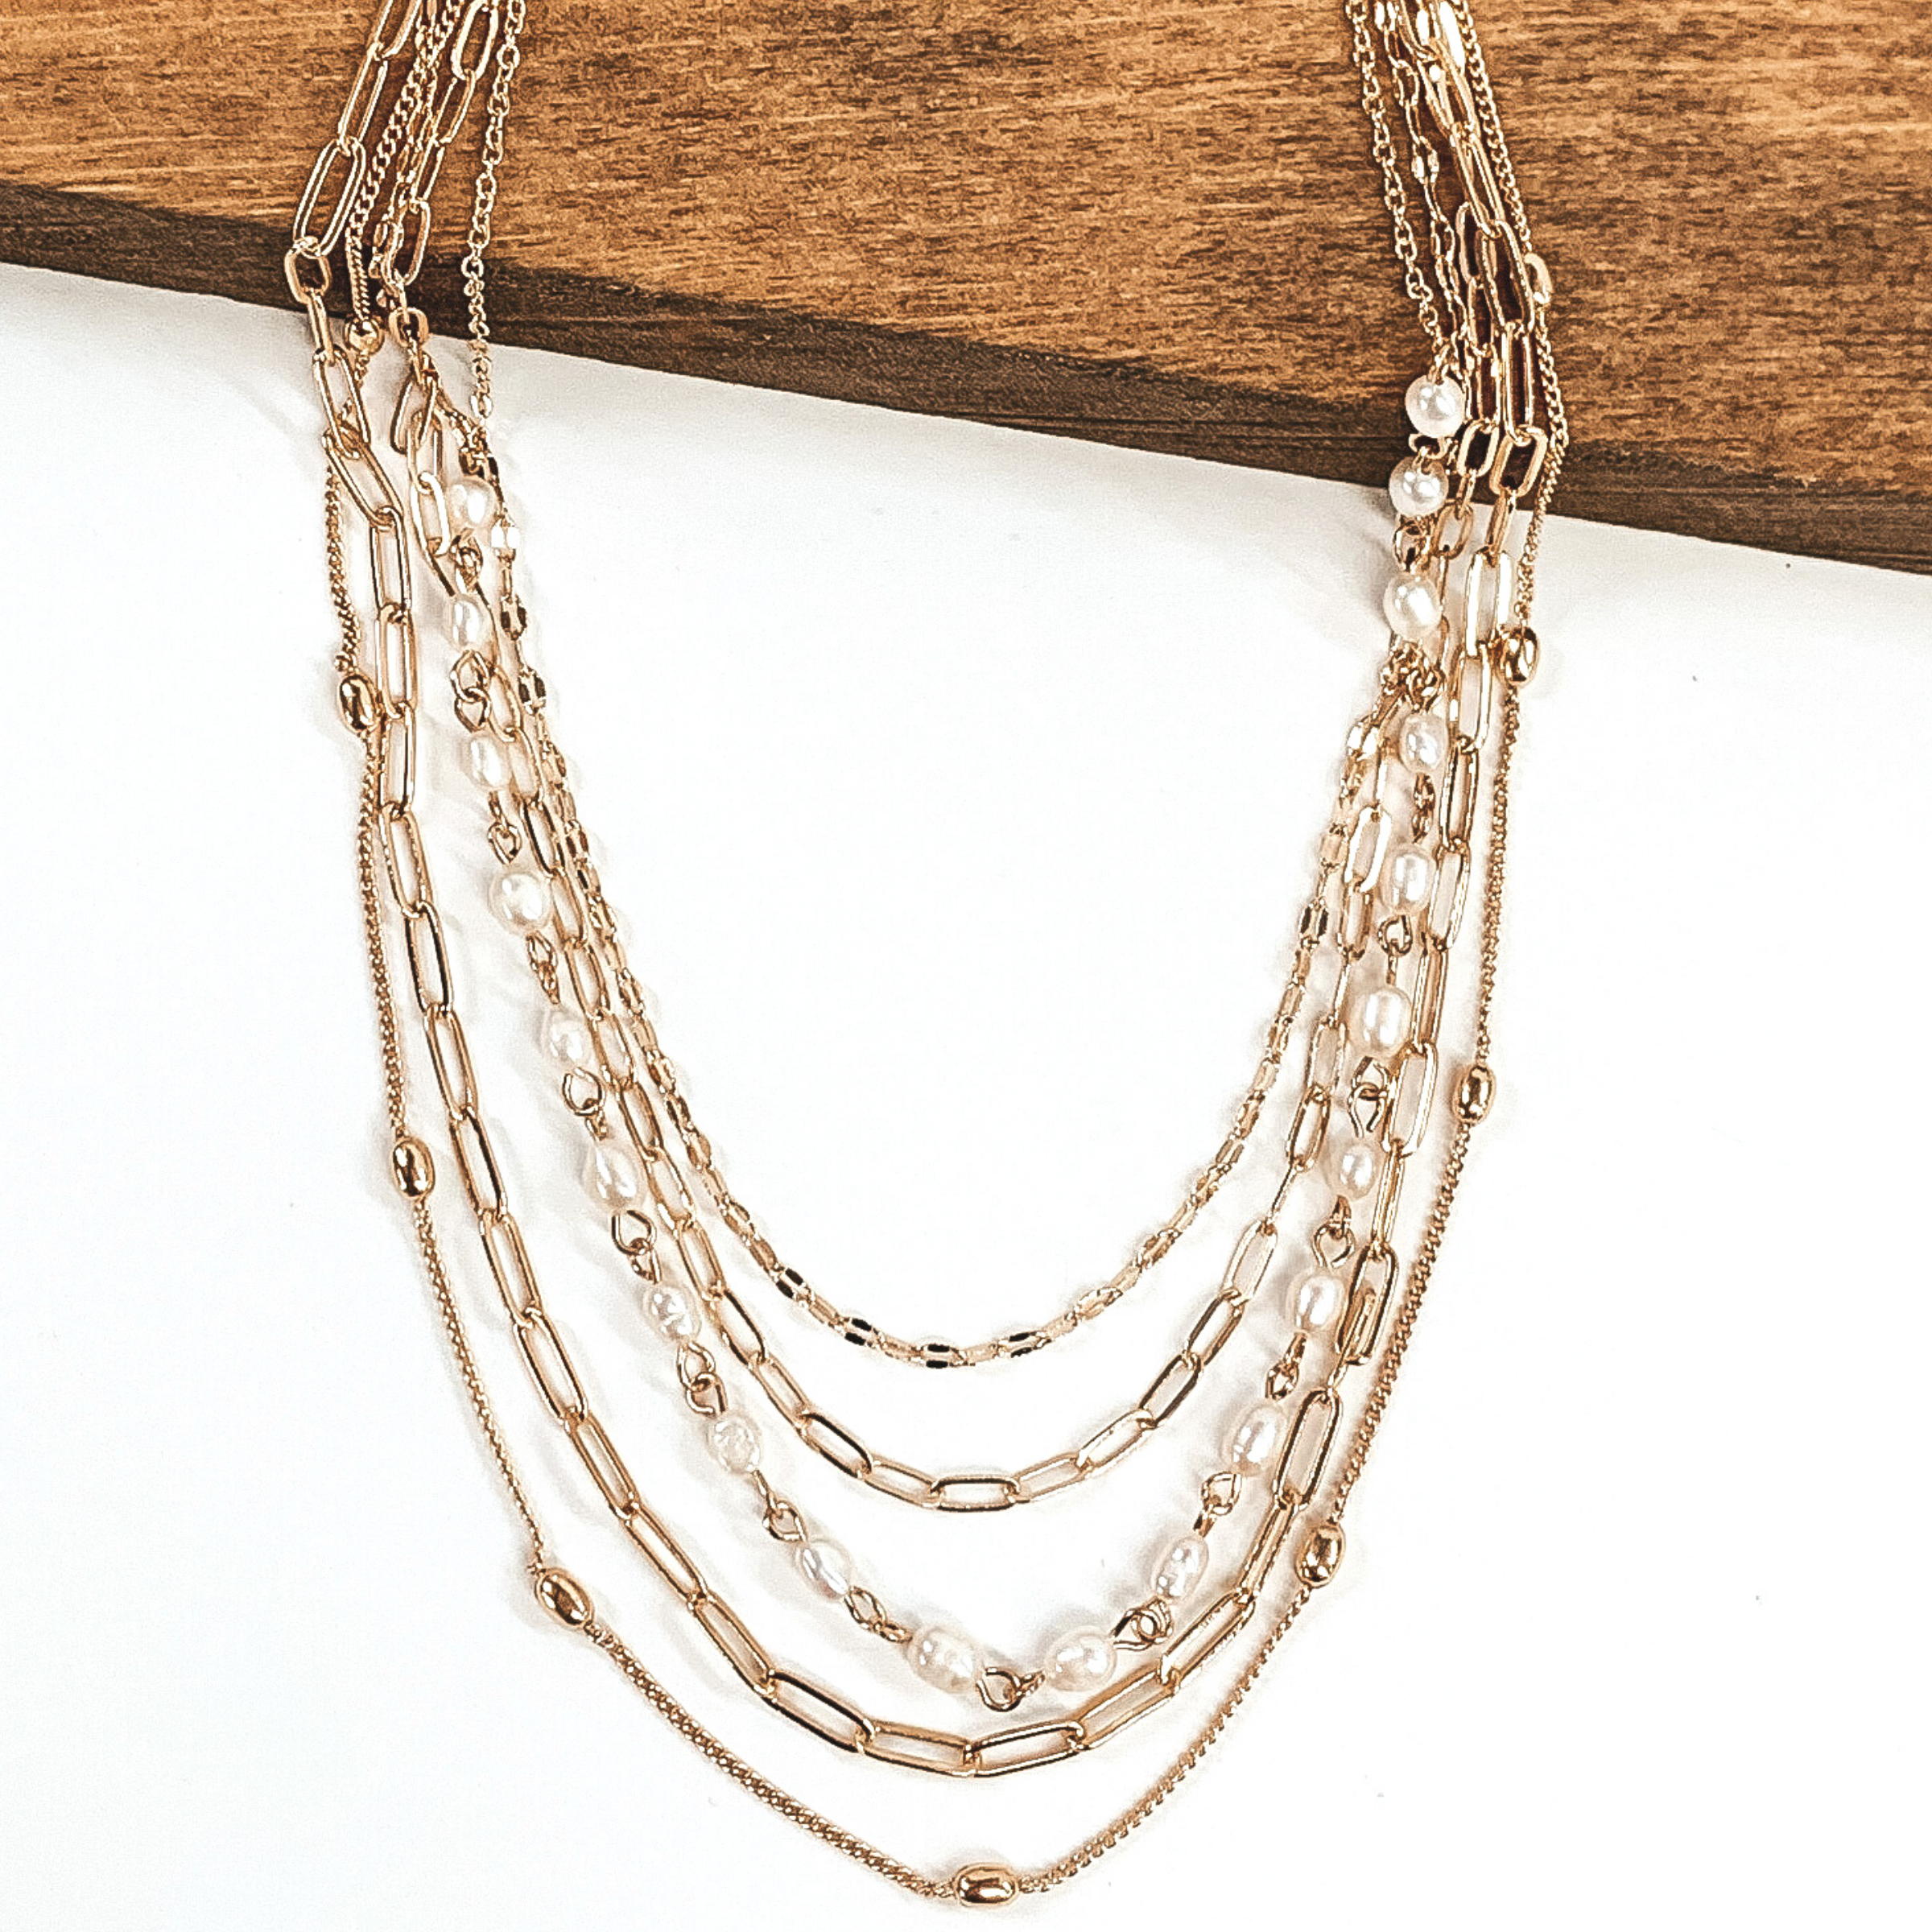 This necklace has 5 different gold chains. One includes gold beads, while another includes white pearls. This necklace is pictured on a white background while partially laying on a dark piece of wood.